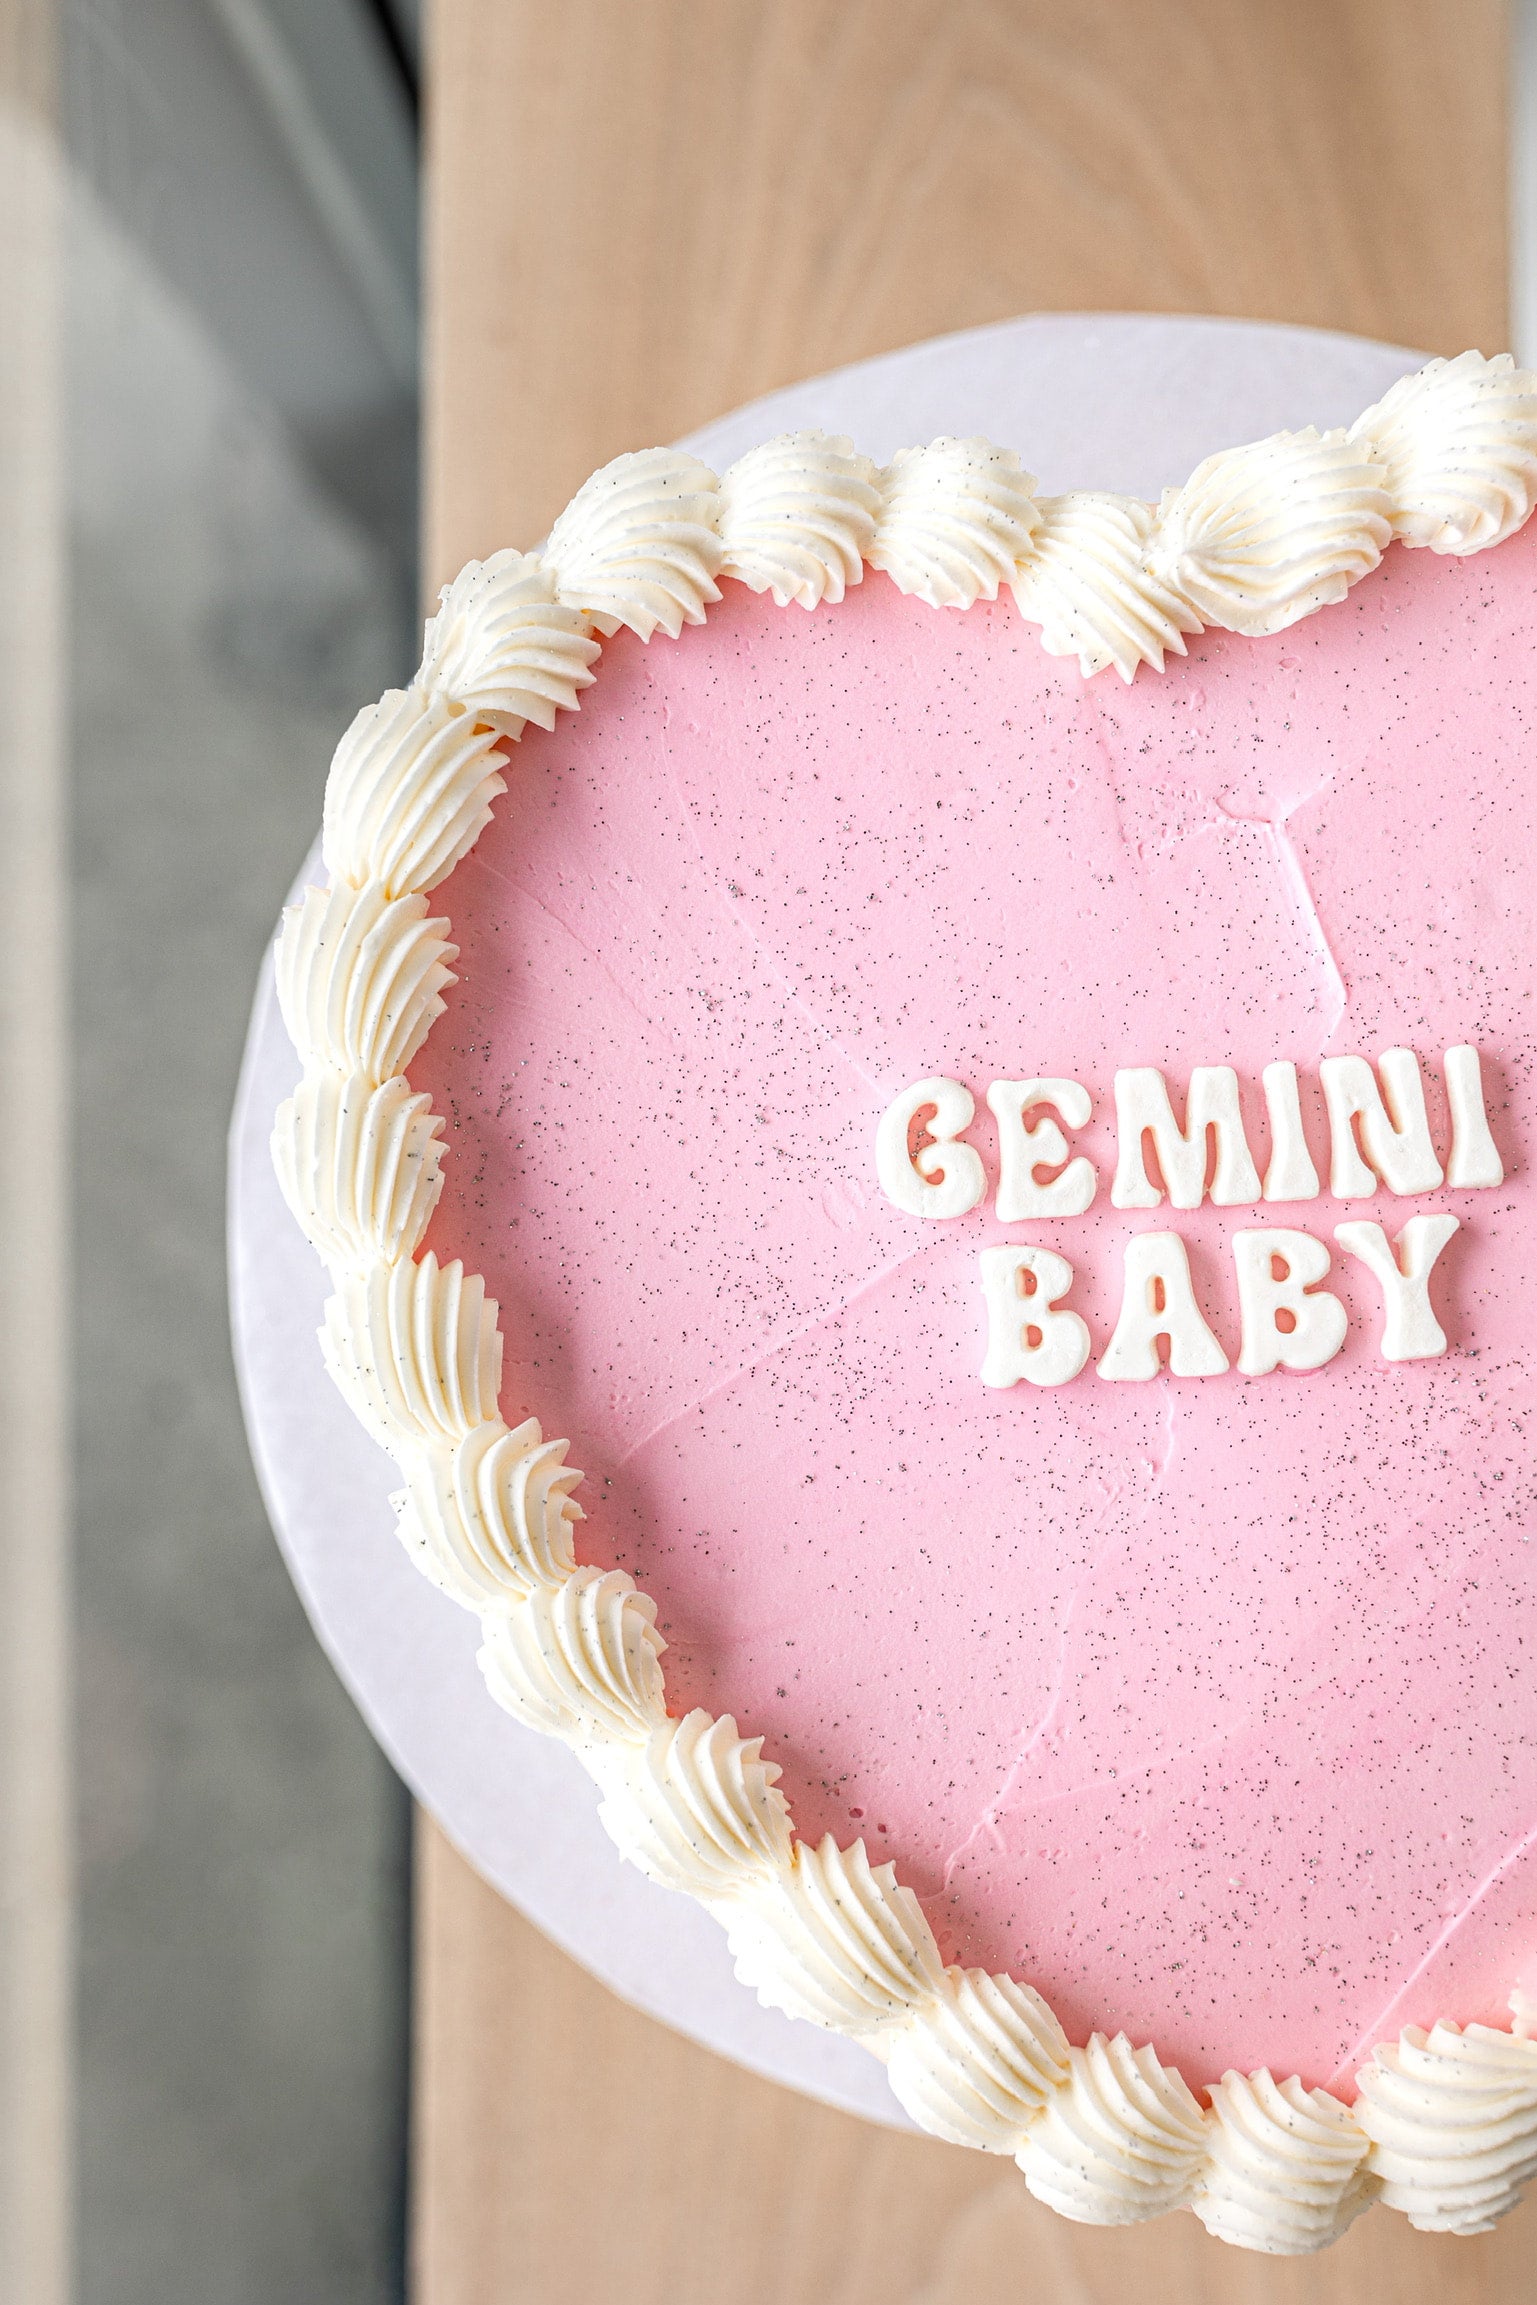 Your Ideal Wedding Cake, According to Your Zodiac Sign